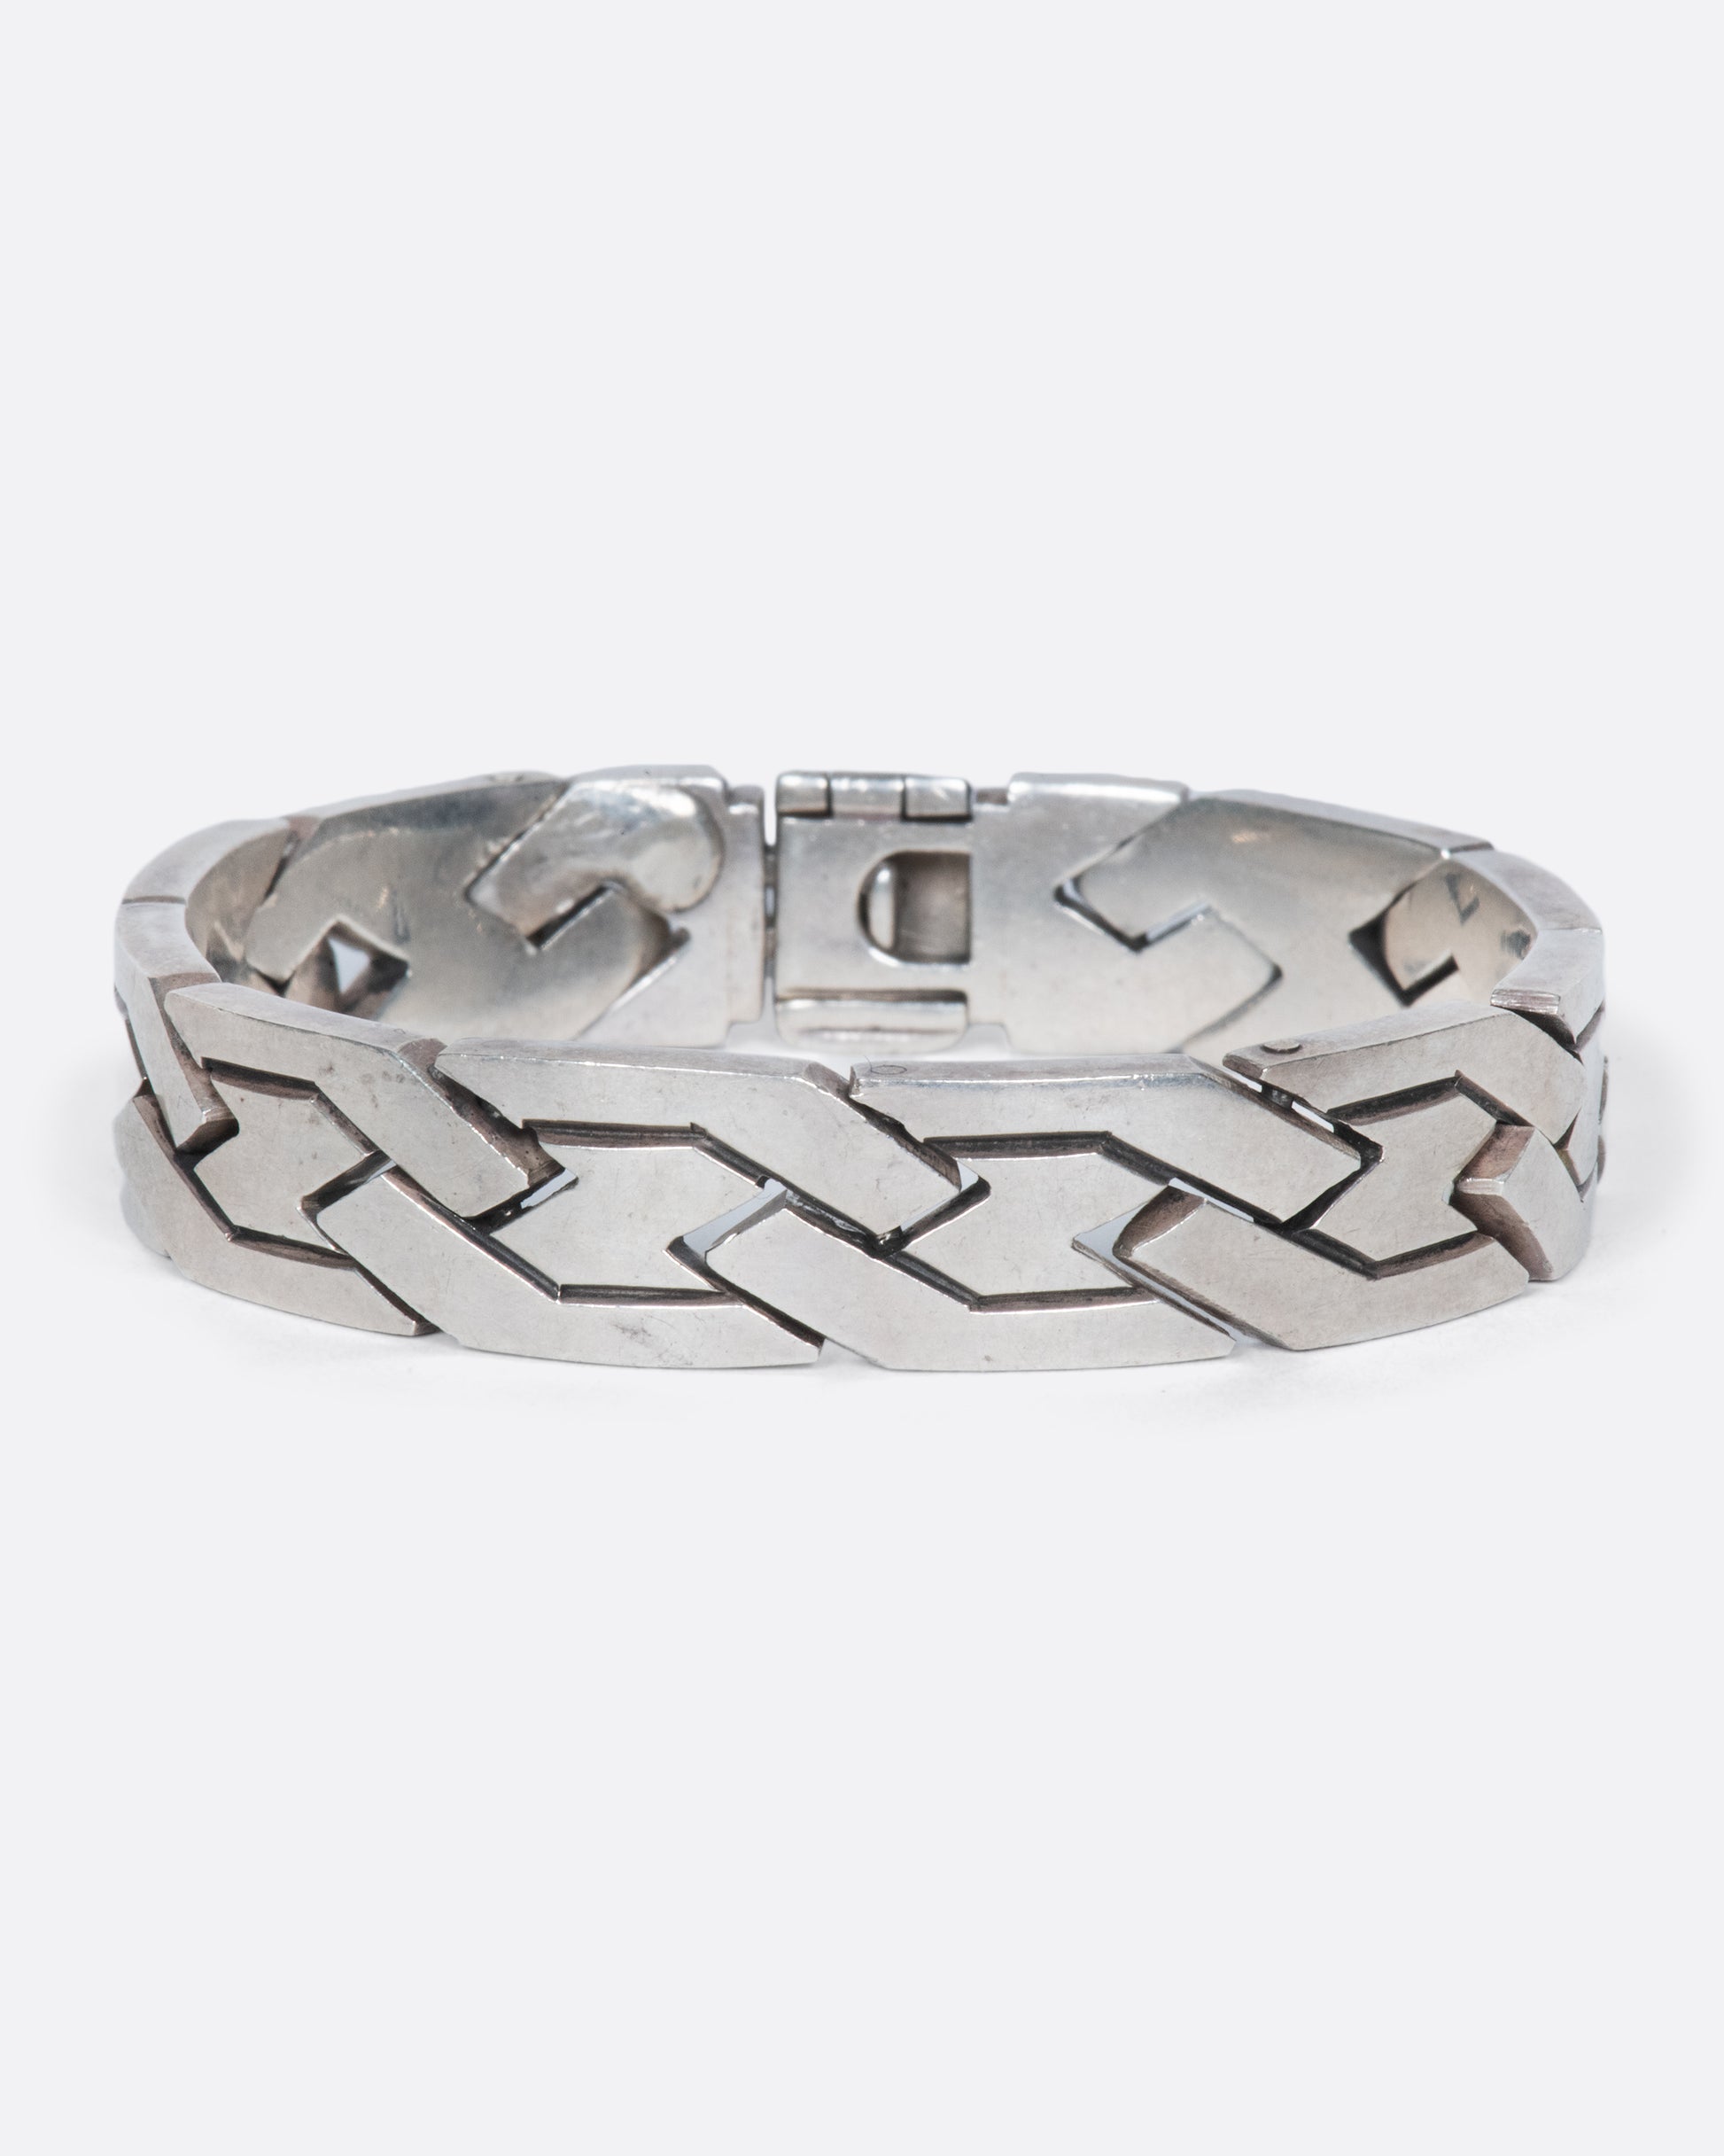 A vintage sterling silver flat chain bracelet with a woven-link design. The large, flat links reflect light making this piece especially eye-catching.